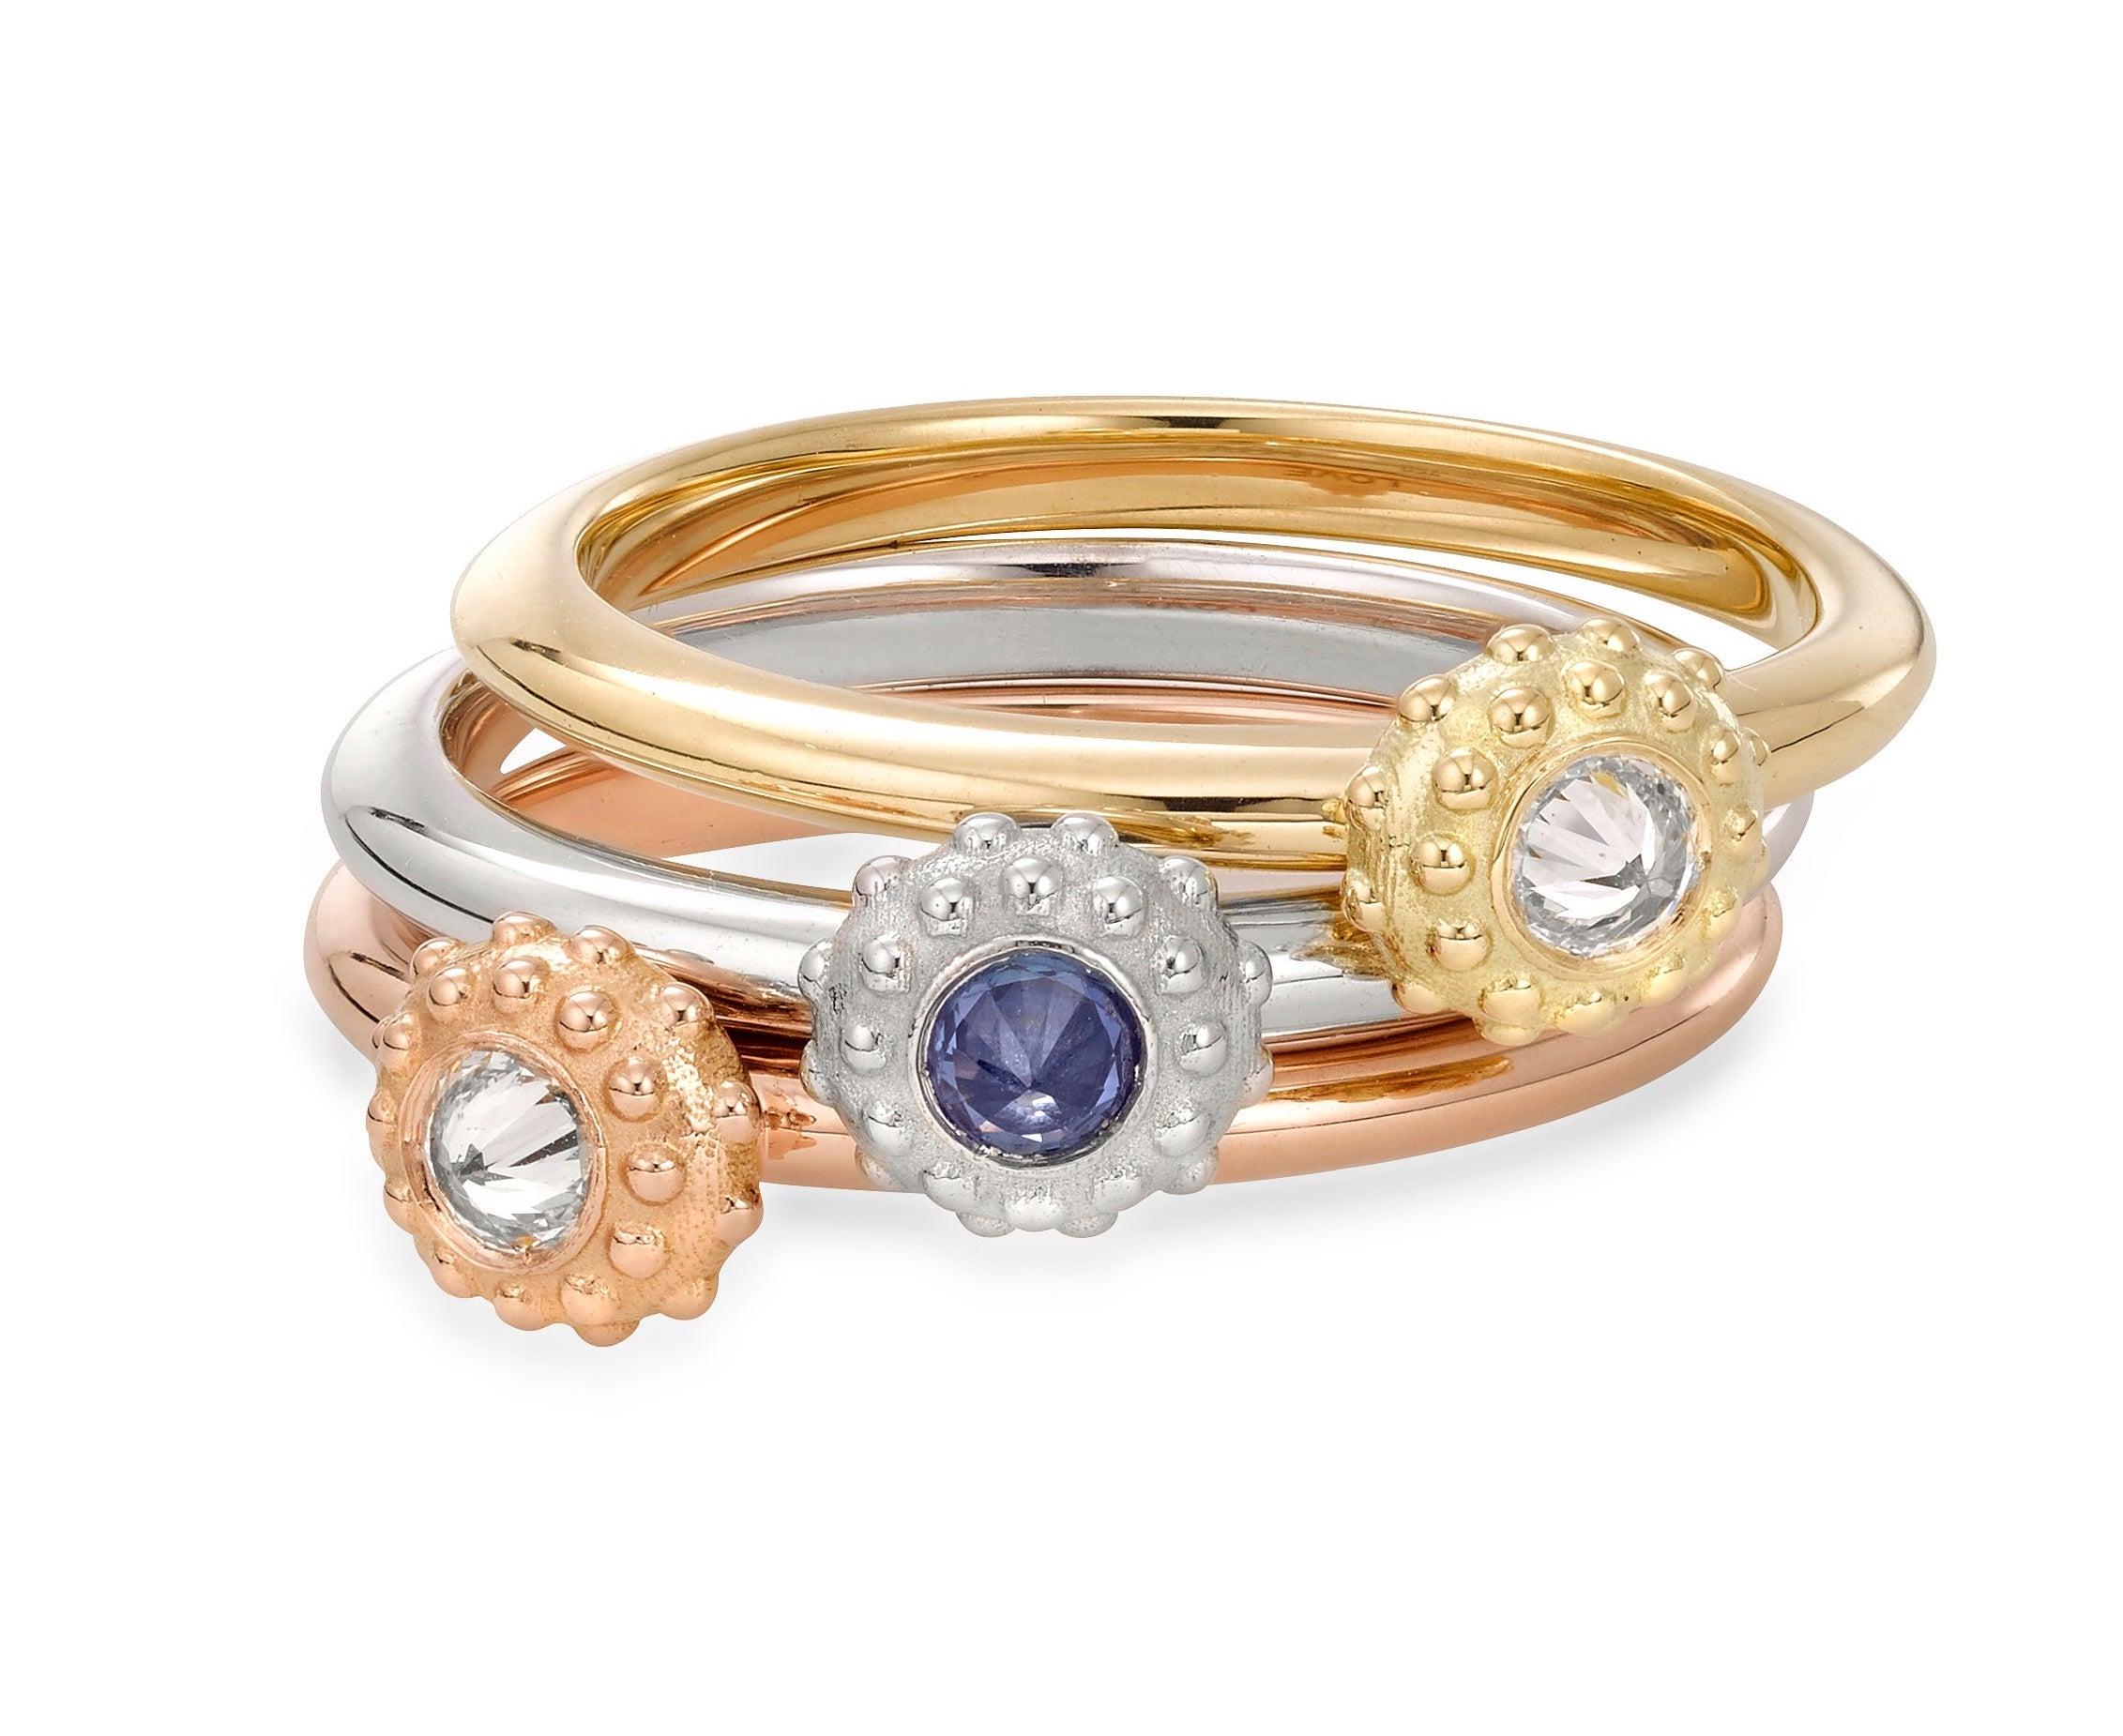 For Sale:  AnaKatarina White Gold and Sapphire 'Evolution' Stacking Ring 5